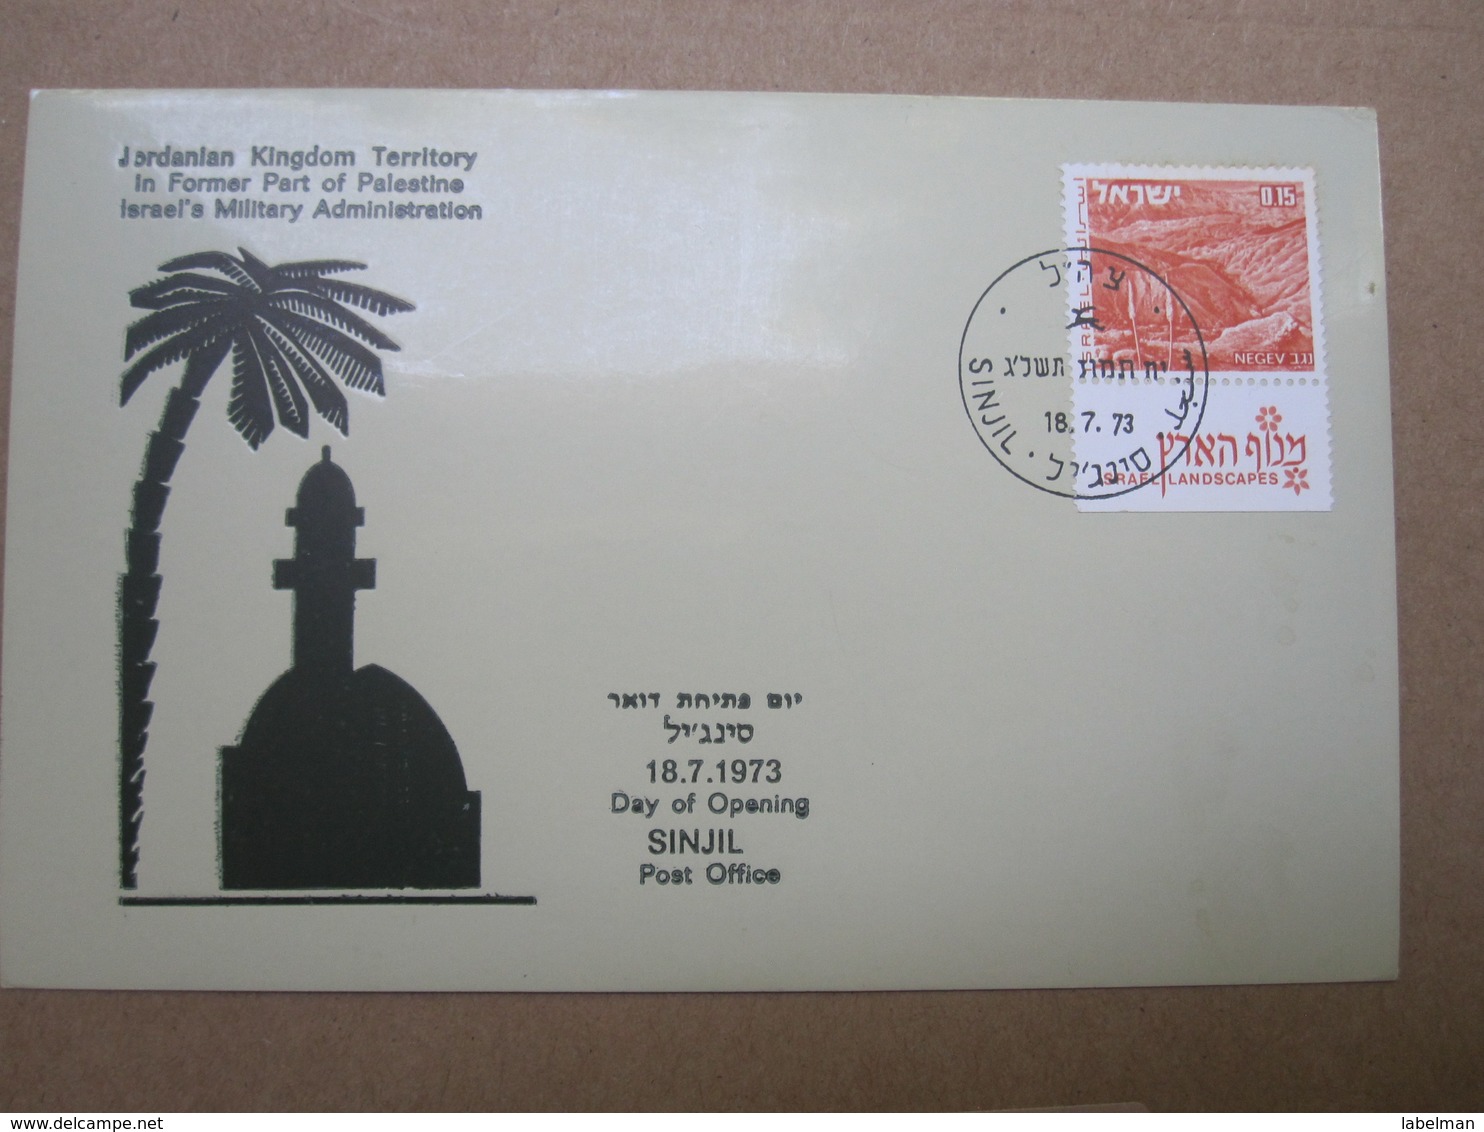 1973 POO FIRST DAY POST OFFICE OPENING SINJIL PALESTINE JORDAN ISRAEL MILITARY ADMINISTRATION MAXIMUM CARD COVER CACHET - Covers & Documents